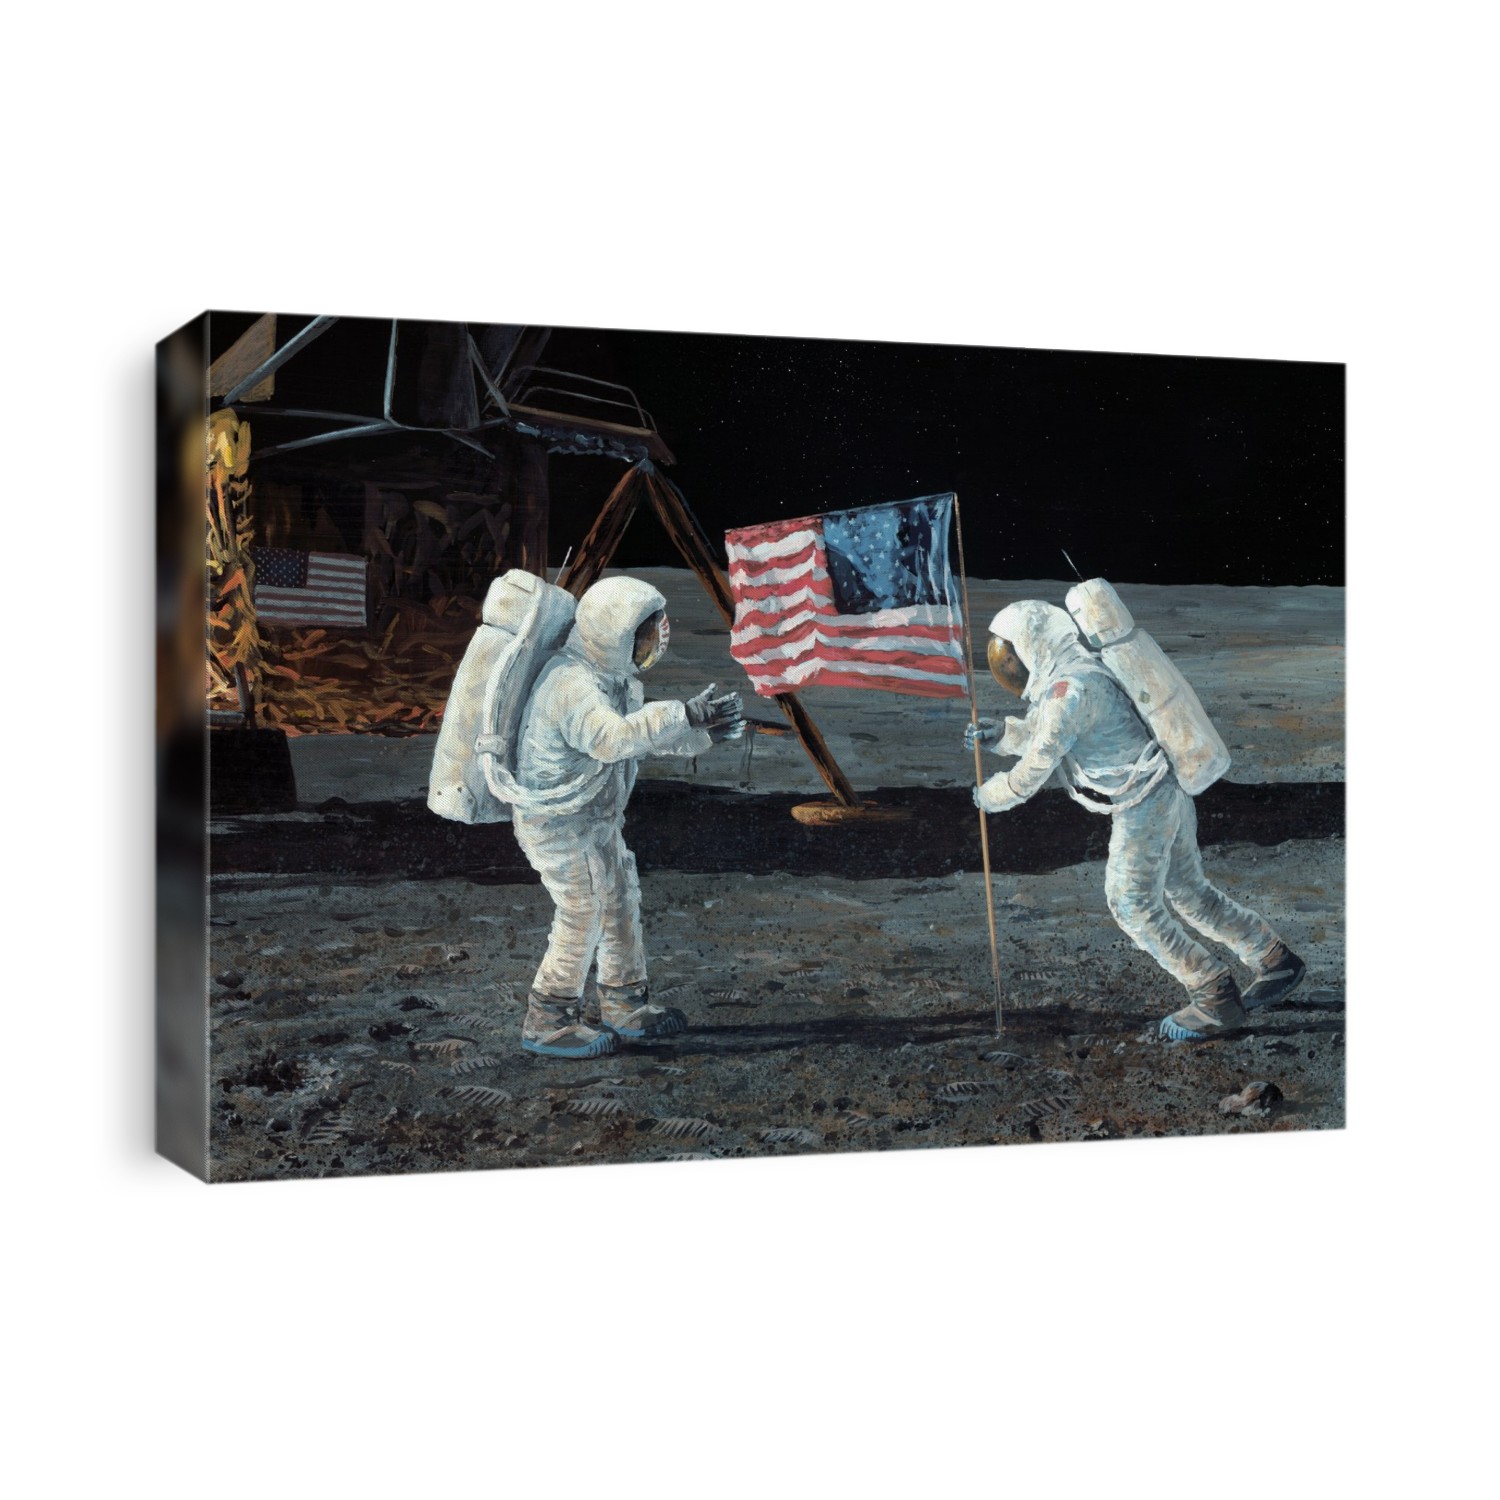 Apollo 11 Moon landing. Artwork of US astronauts Neil Armstrong (right) and Buzz Aldrin (left) placing the US flag on the Moon during the Apollo 11 mission, the first manned mission to land on the Moon (20 July 1969). Early in the morning of 21 July, they descended from the lunar landing module to the surface. They spent 2.5 hours on the surface, deploying instruments, taking photographs and drilling for rock samples. The Lunar Flag Assembly (which included a horizontal strut to support the flag on the airless Moon) was erected at 03:41 UTC. The flag was later knocked over by the exhaust from the ascent module.